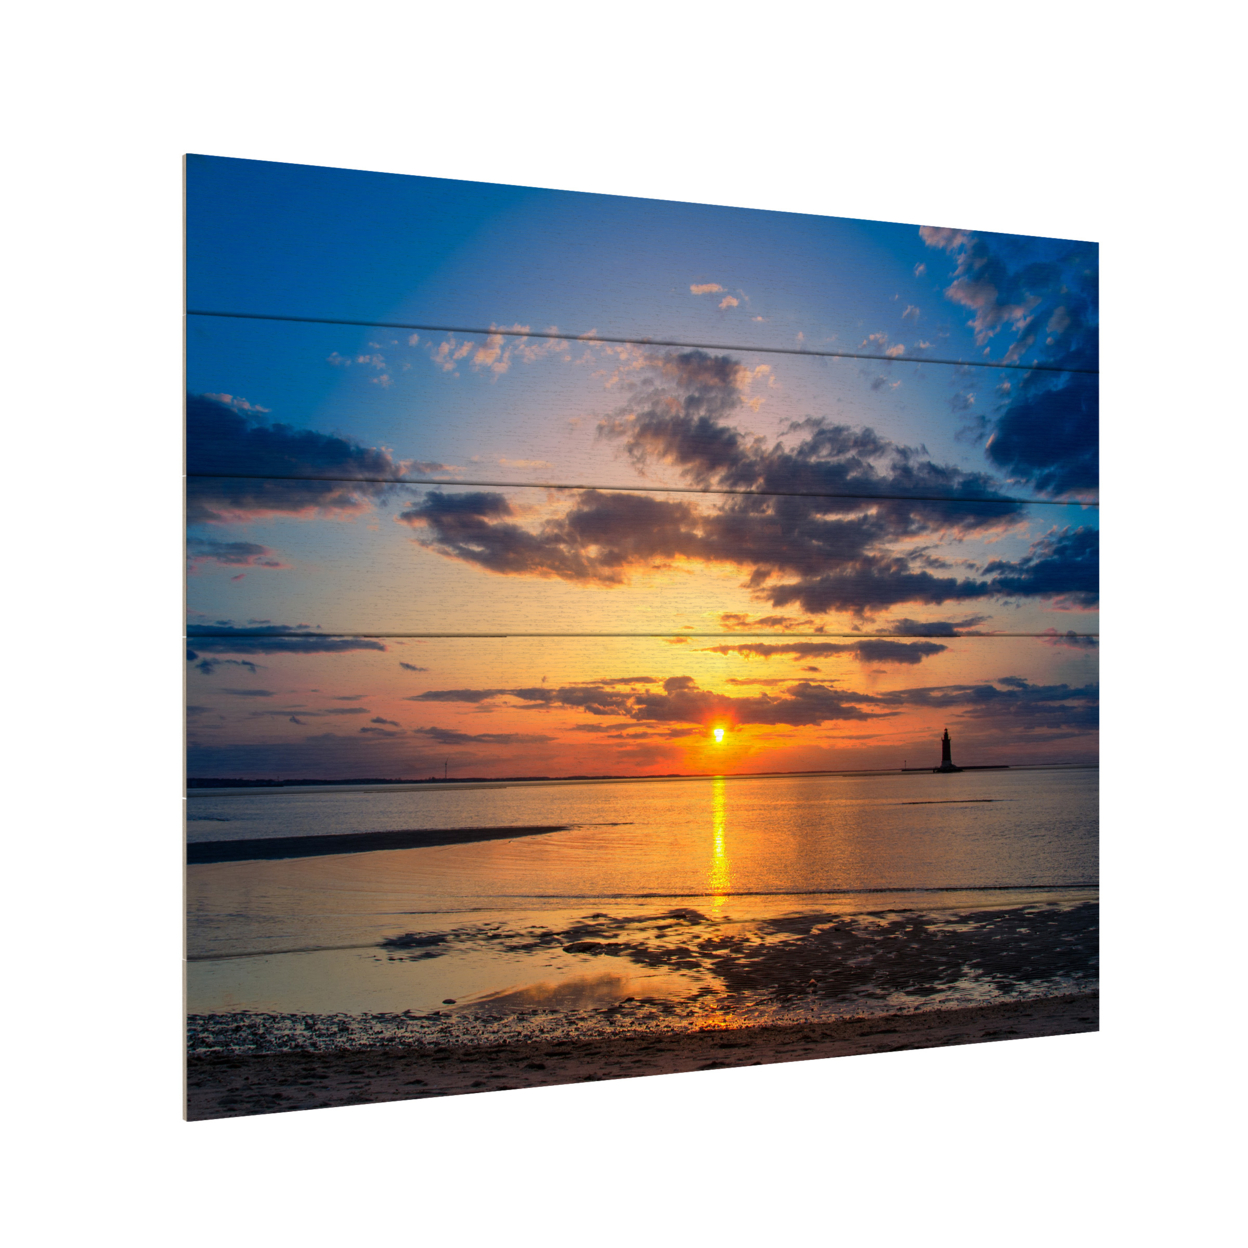 Wooden Slat Art 18 X 22 Inches Titled Sunset Breakwater Lighthouse Ready To Hang Home Decor Picture